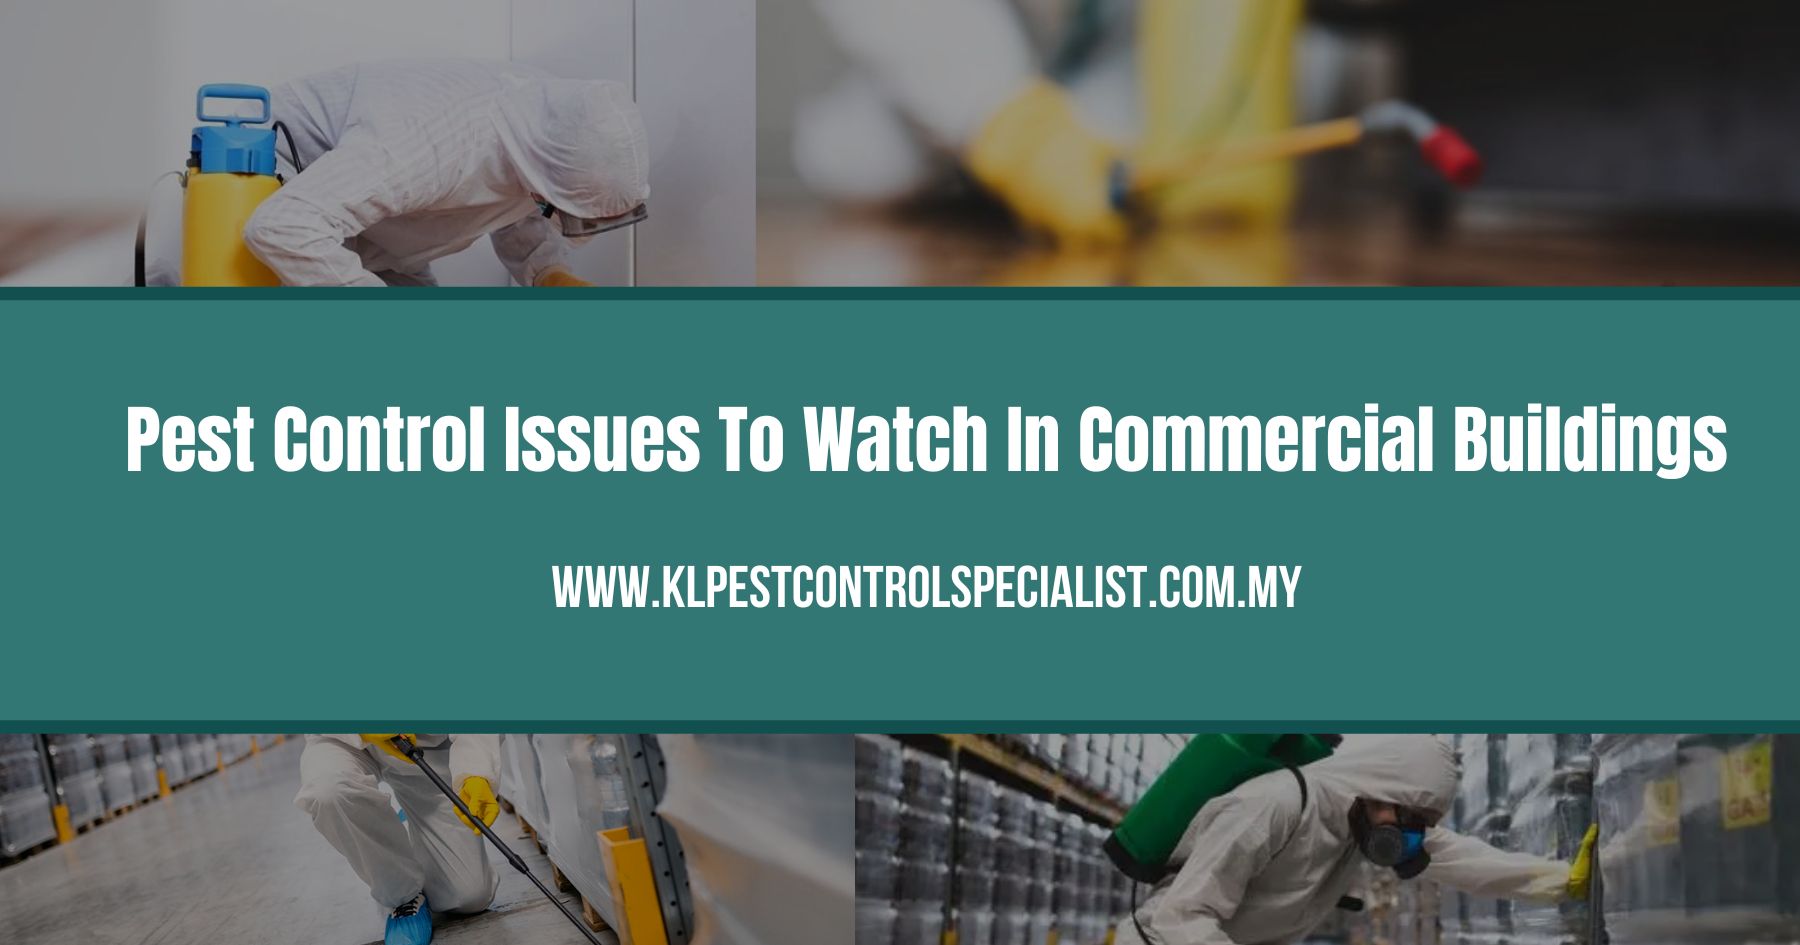 Pest Control Issues To Watch In Commercial Buildings